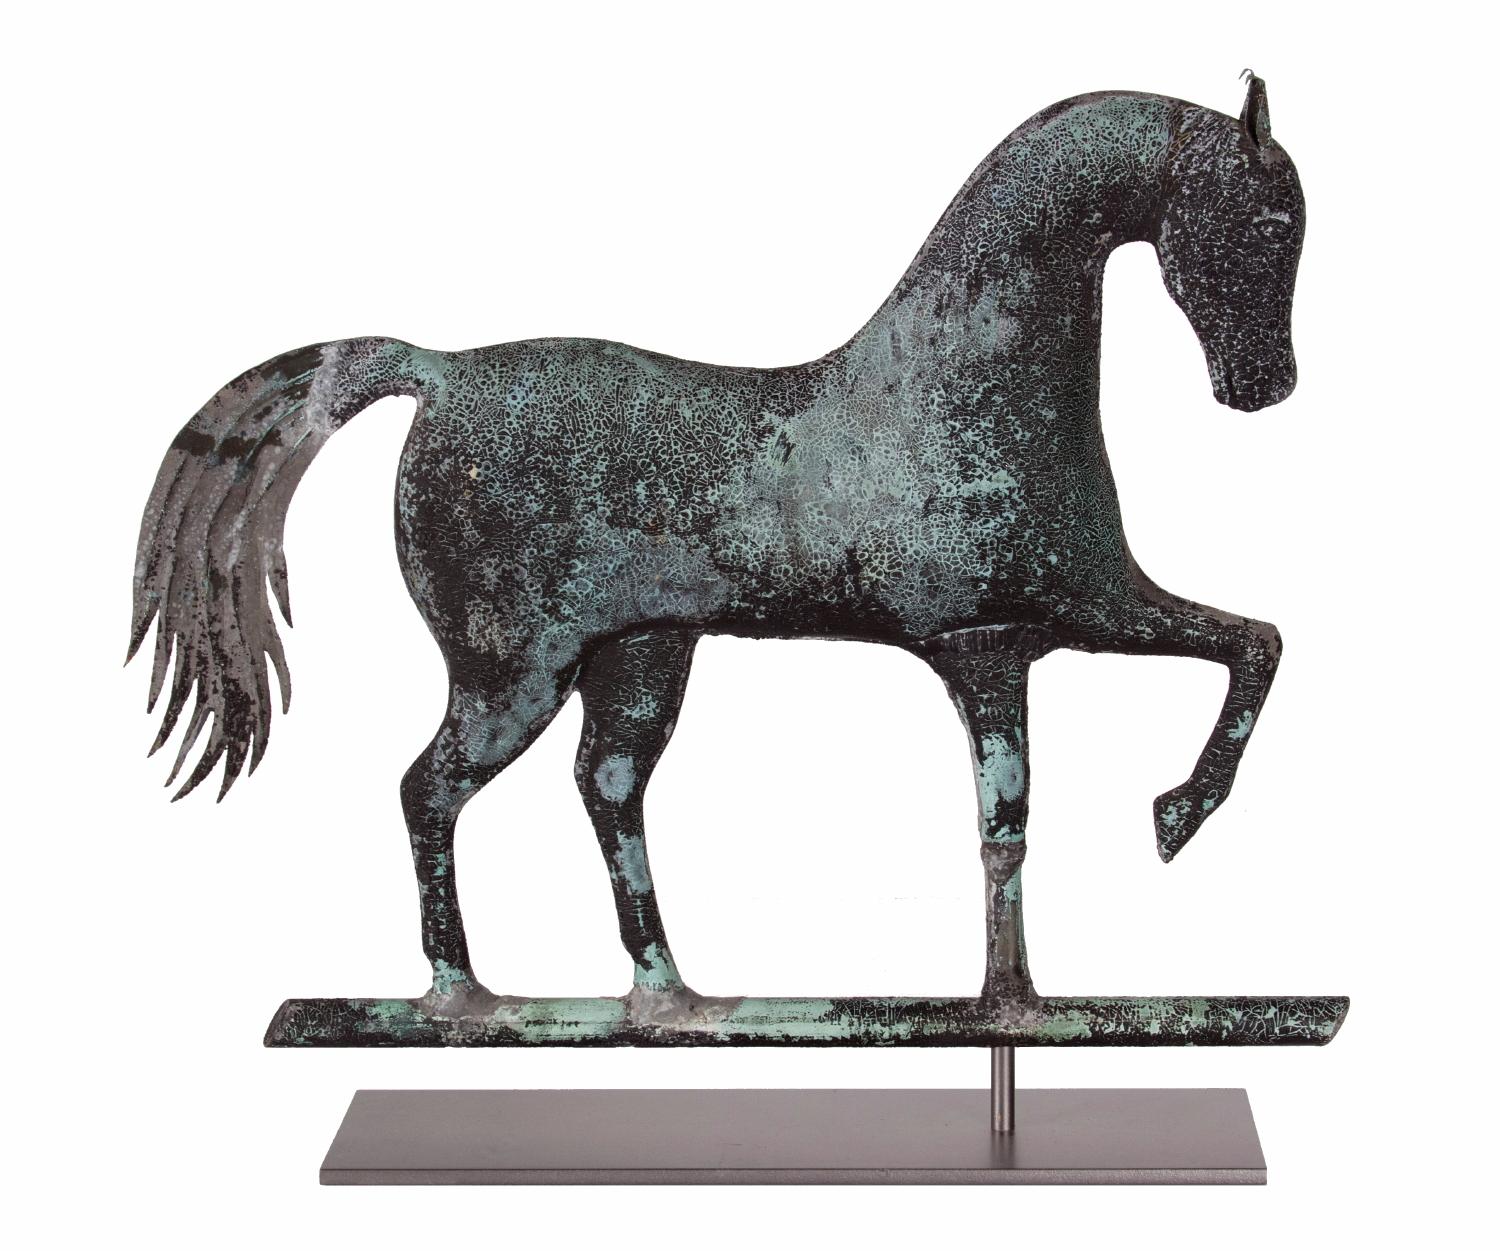 Prancing horse weathervane, attributed to Jewel & Co. Waltham, Massachusetts, CA 1860:

Prancing horse weathervane by A.H. Jewell & Co., Waltham, MA. Made of molded copper, with a cast zinc head, applied copper ears and a sheet copper tail, this